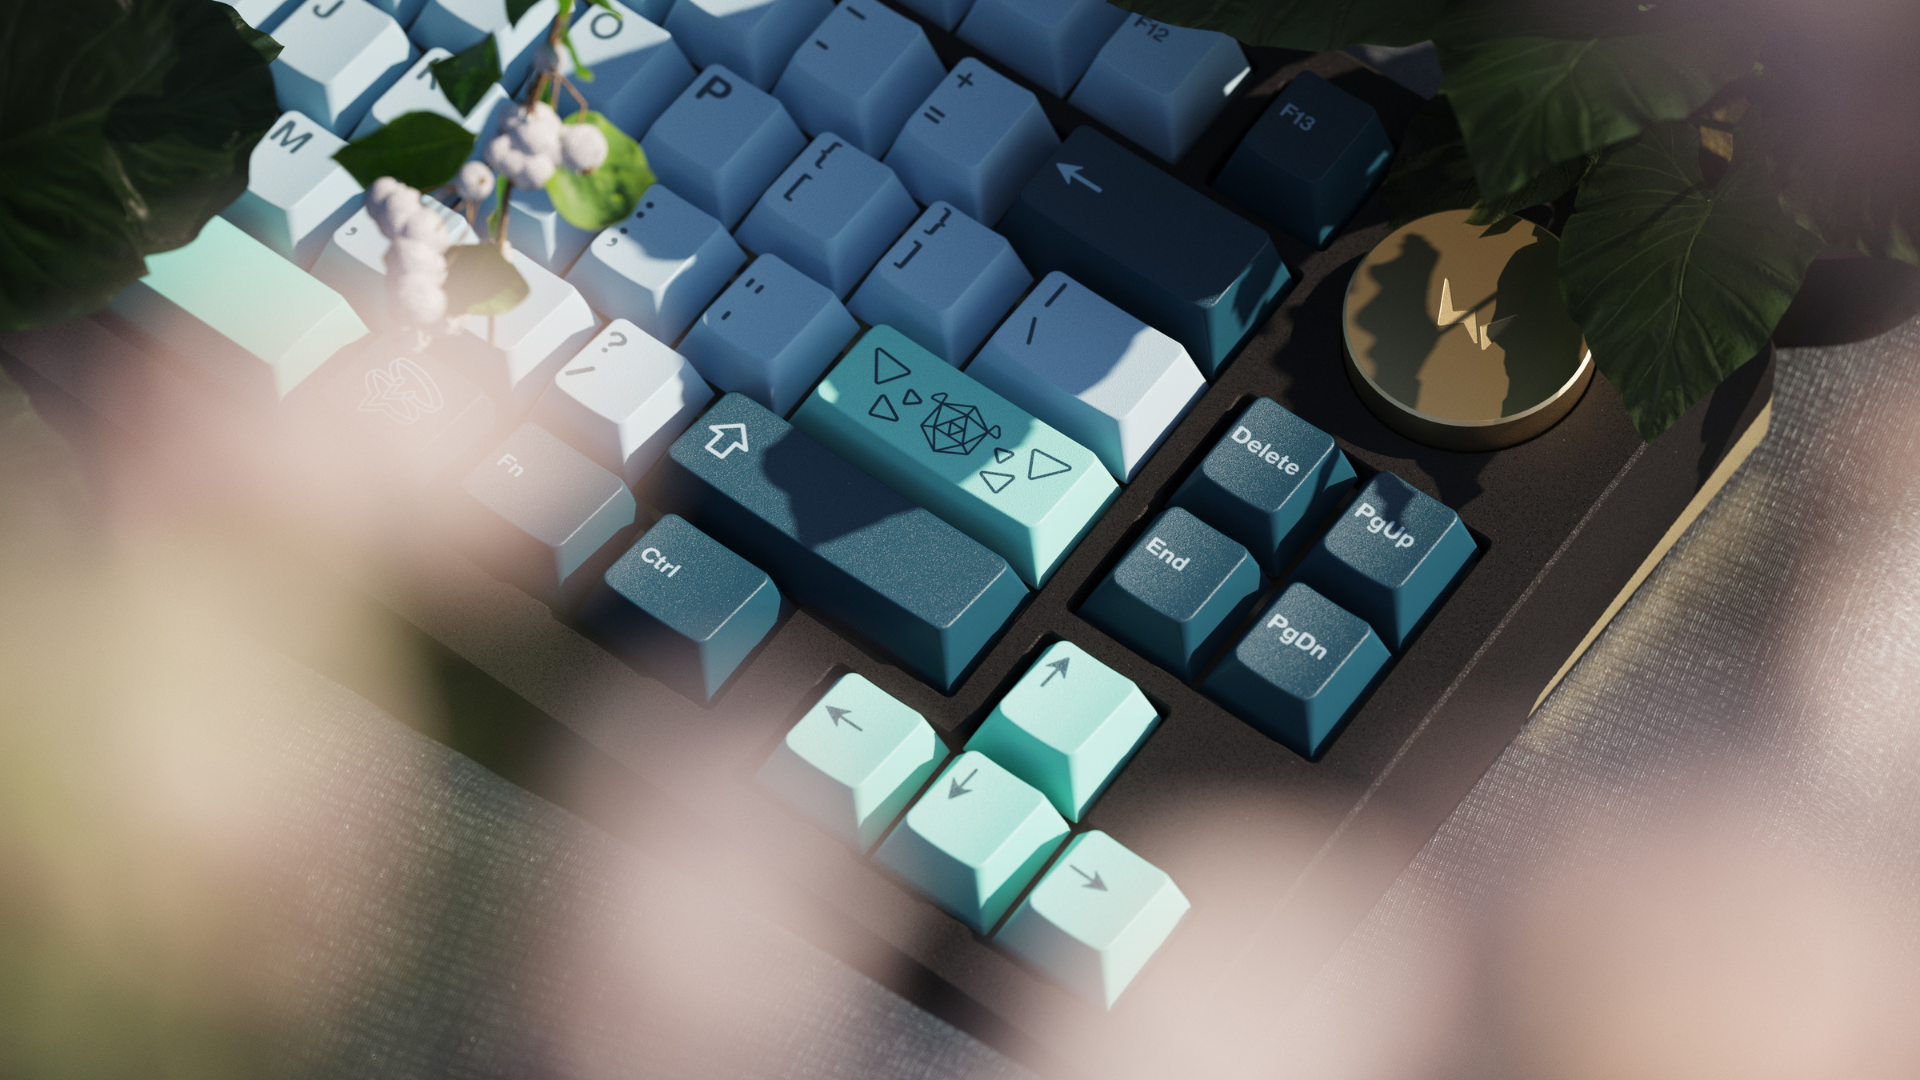 [Pre-Order] WS Entwined Flowers Keycap Set - KeebsForAll